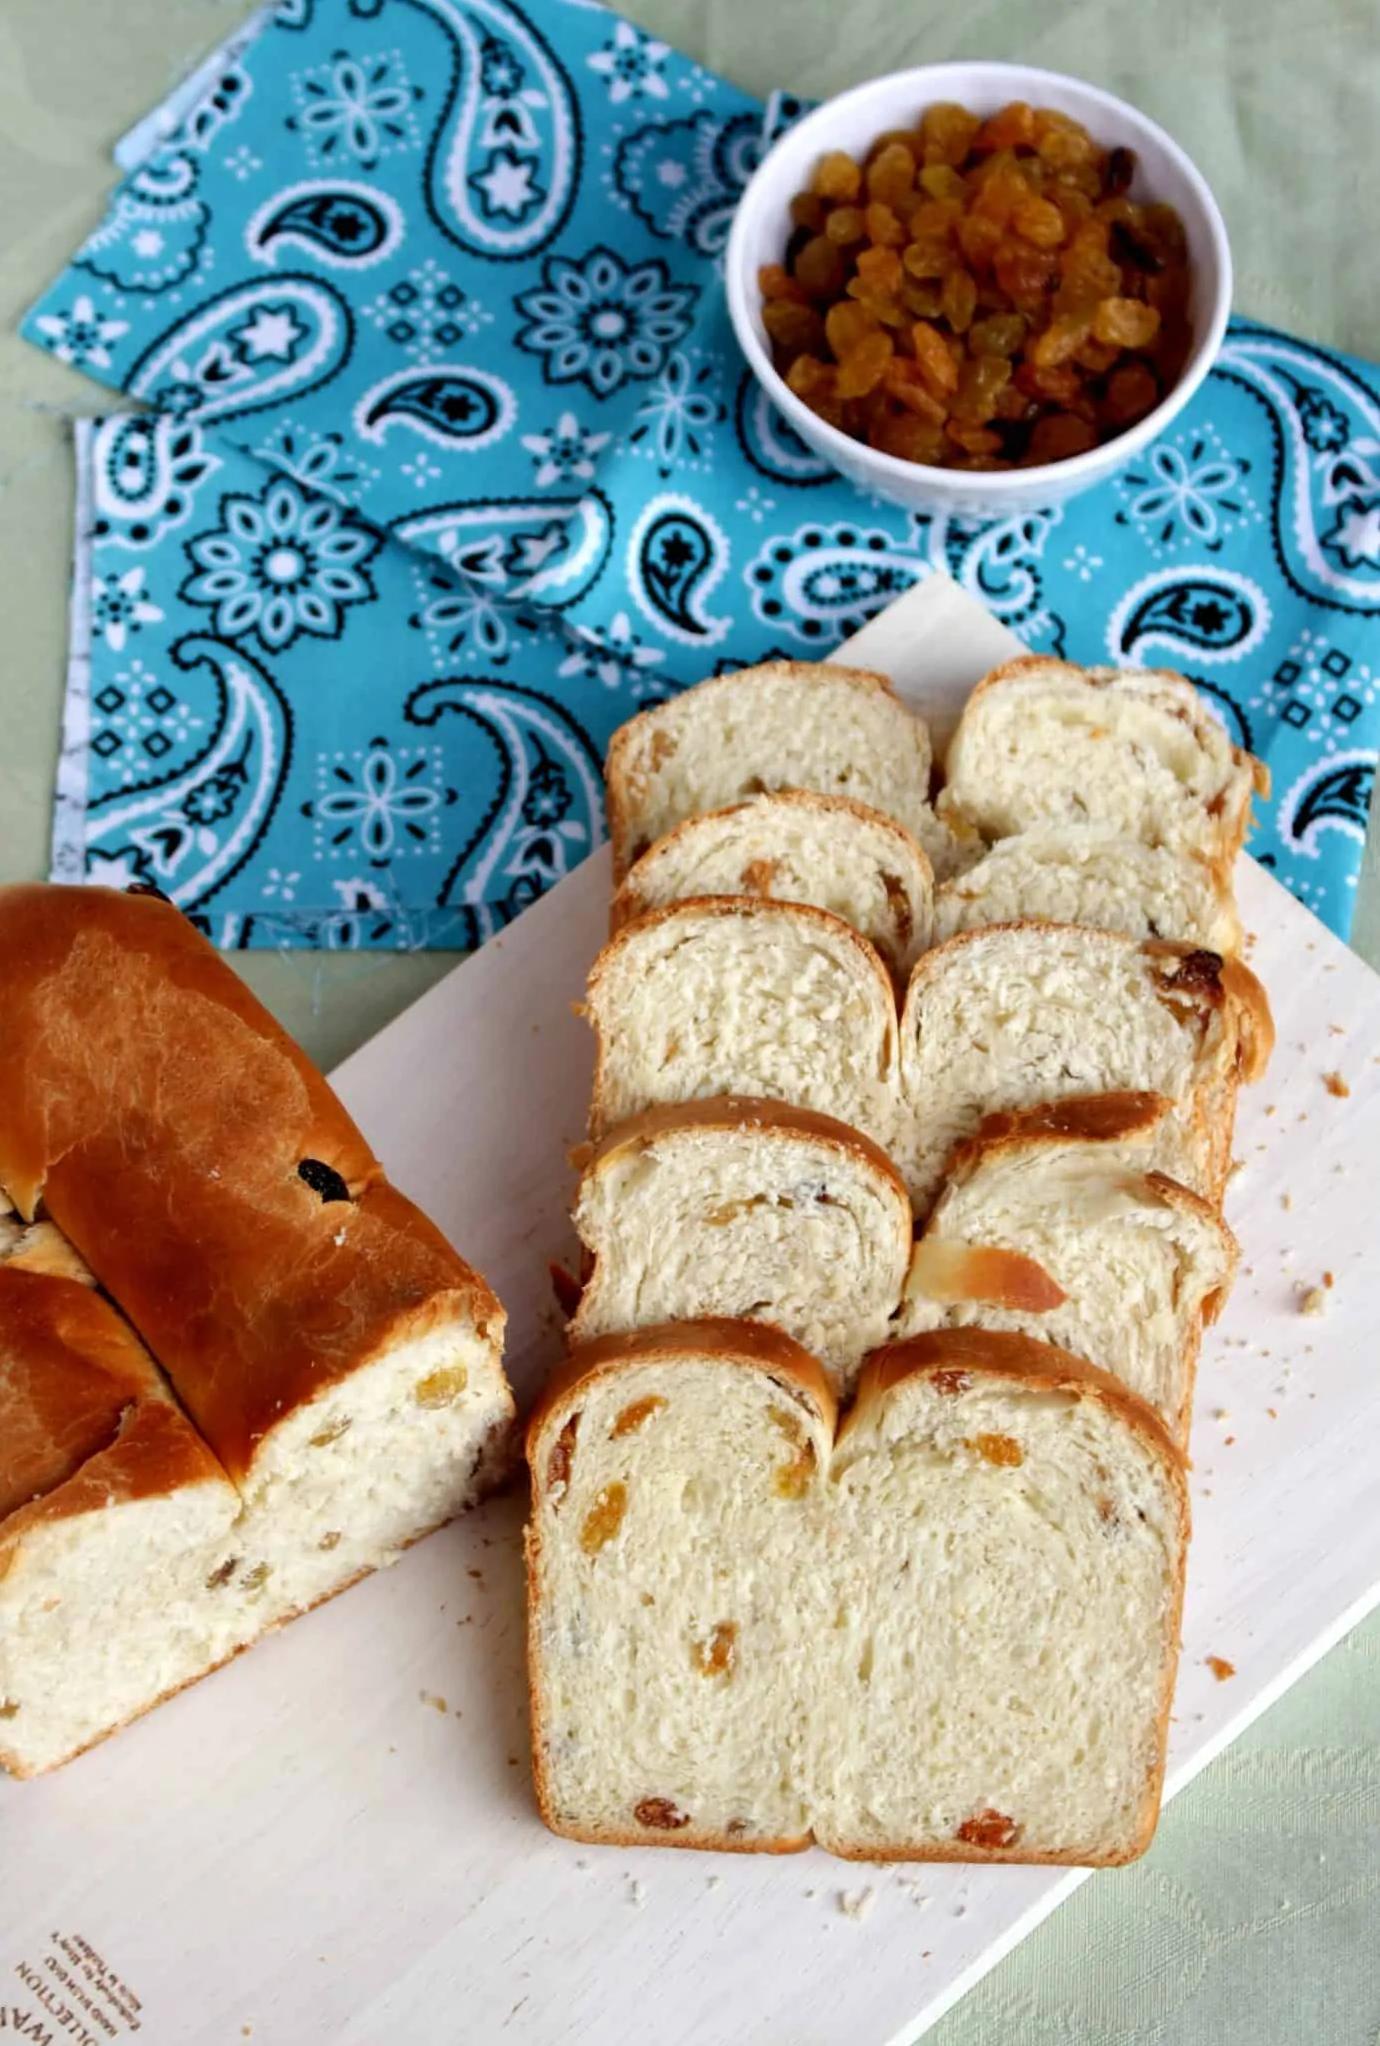  Unique in texture and packed with delicious flavors, this bread will satisfy any bread lover.